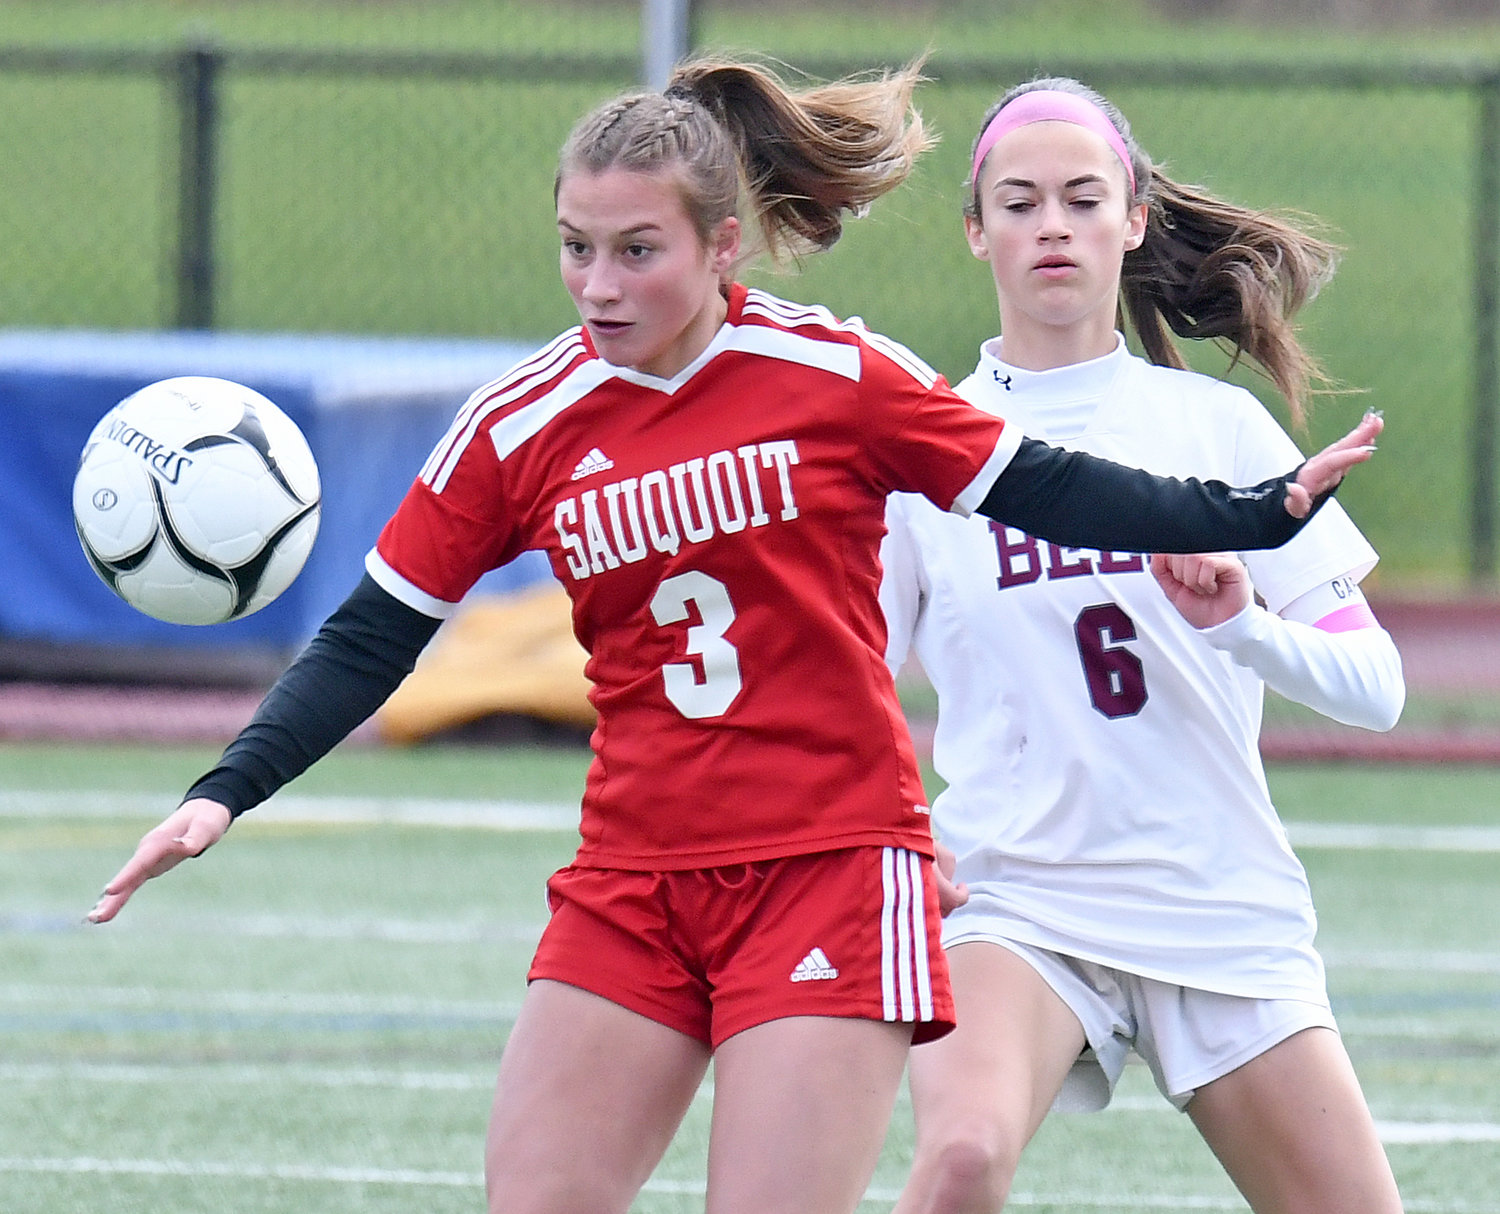 Sauquoit Valley's Kirsten Shepherd, left, settles the ball and shields Byron-Bergen's Mackenzie Hagen in the Class C state semifinals Saturday at Cortland High School. Sauquoit scored first and last in a 2-1 win to advance to Sunday's title game.